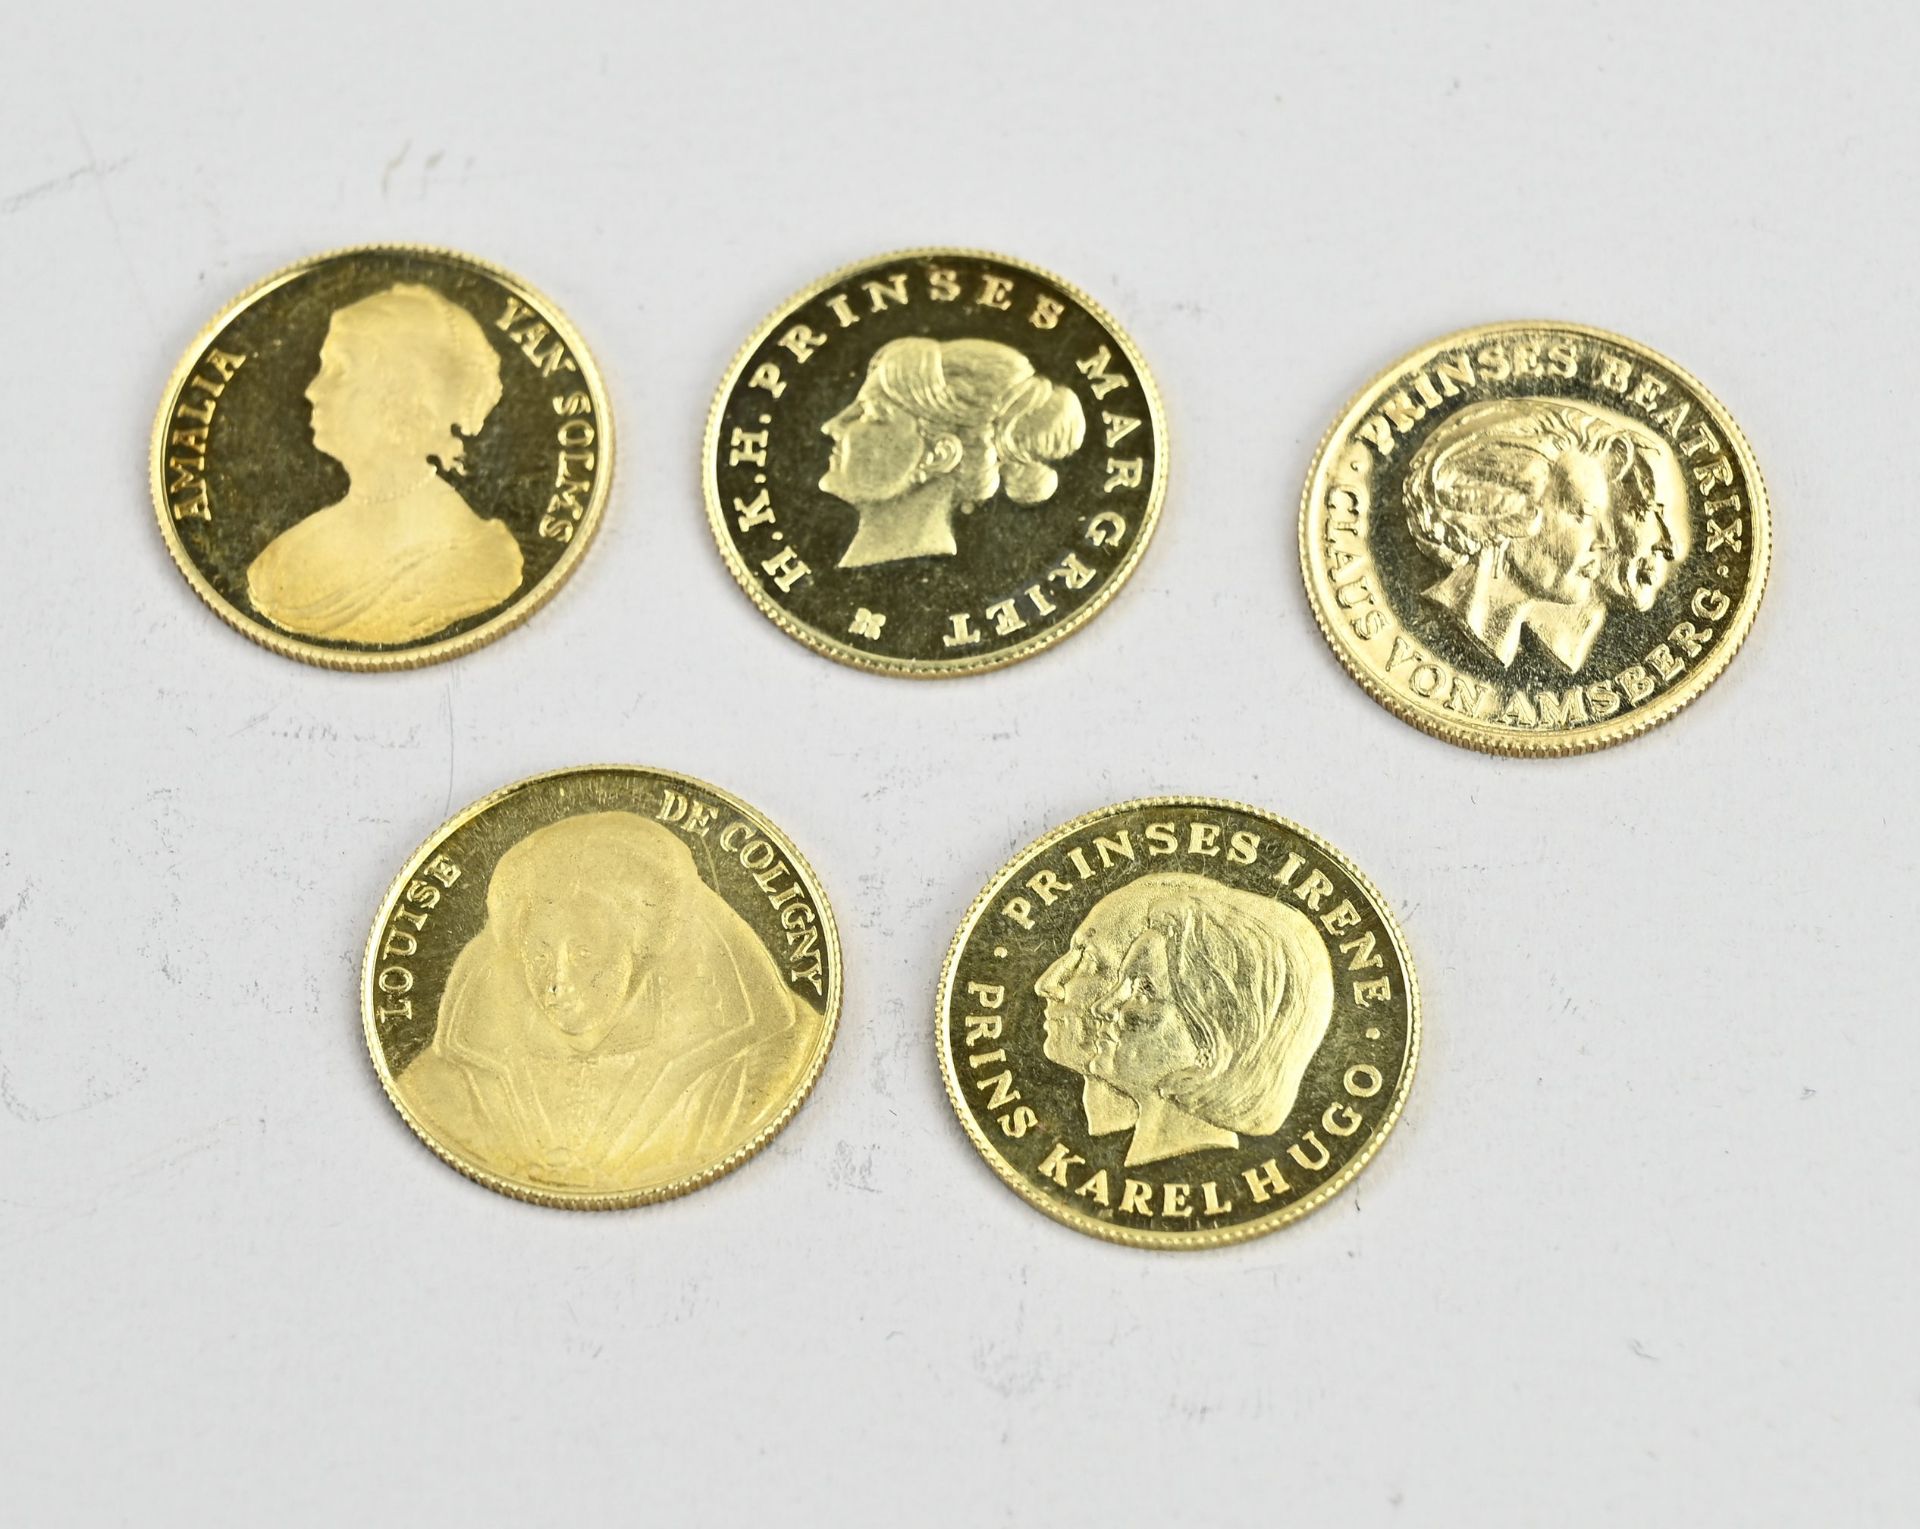 Five gold coins Dutch royal family - Image 2 of 2